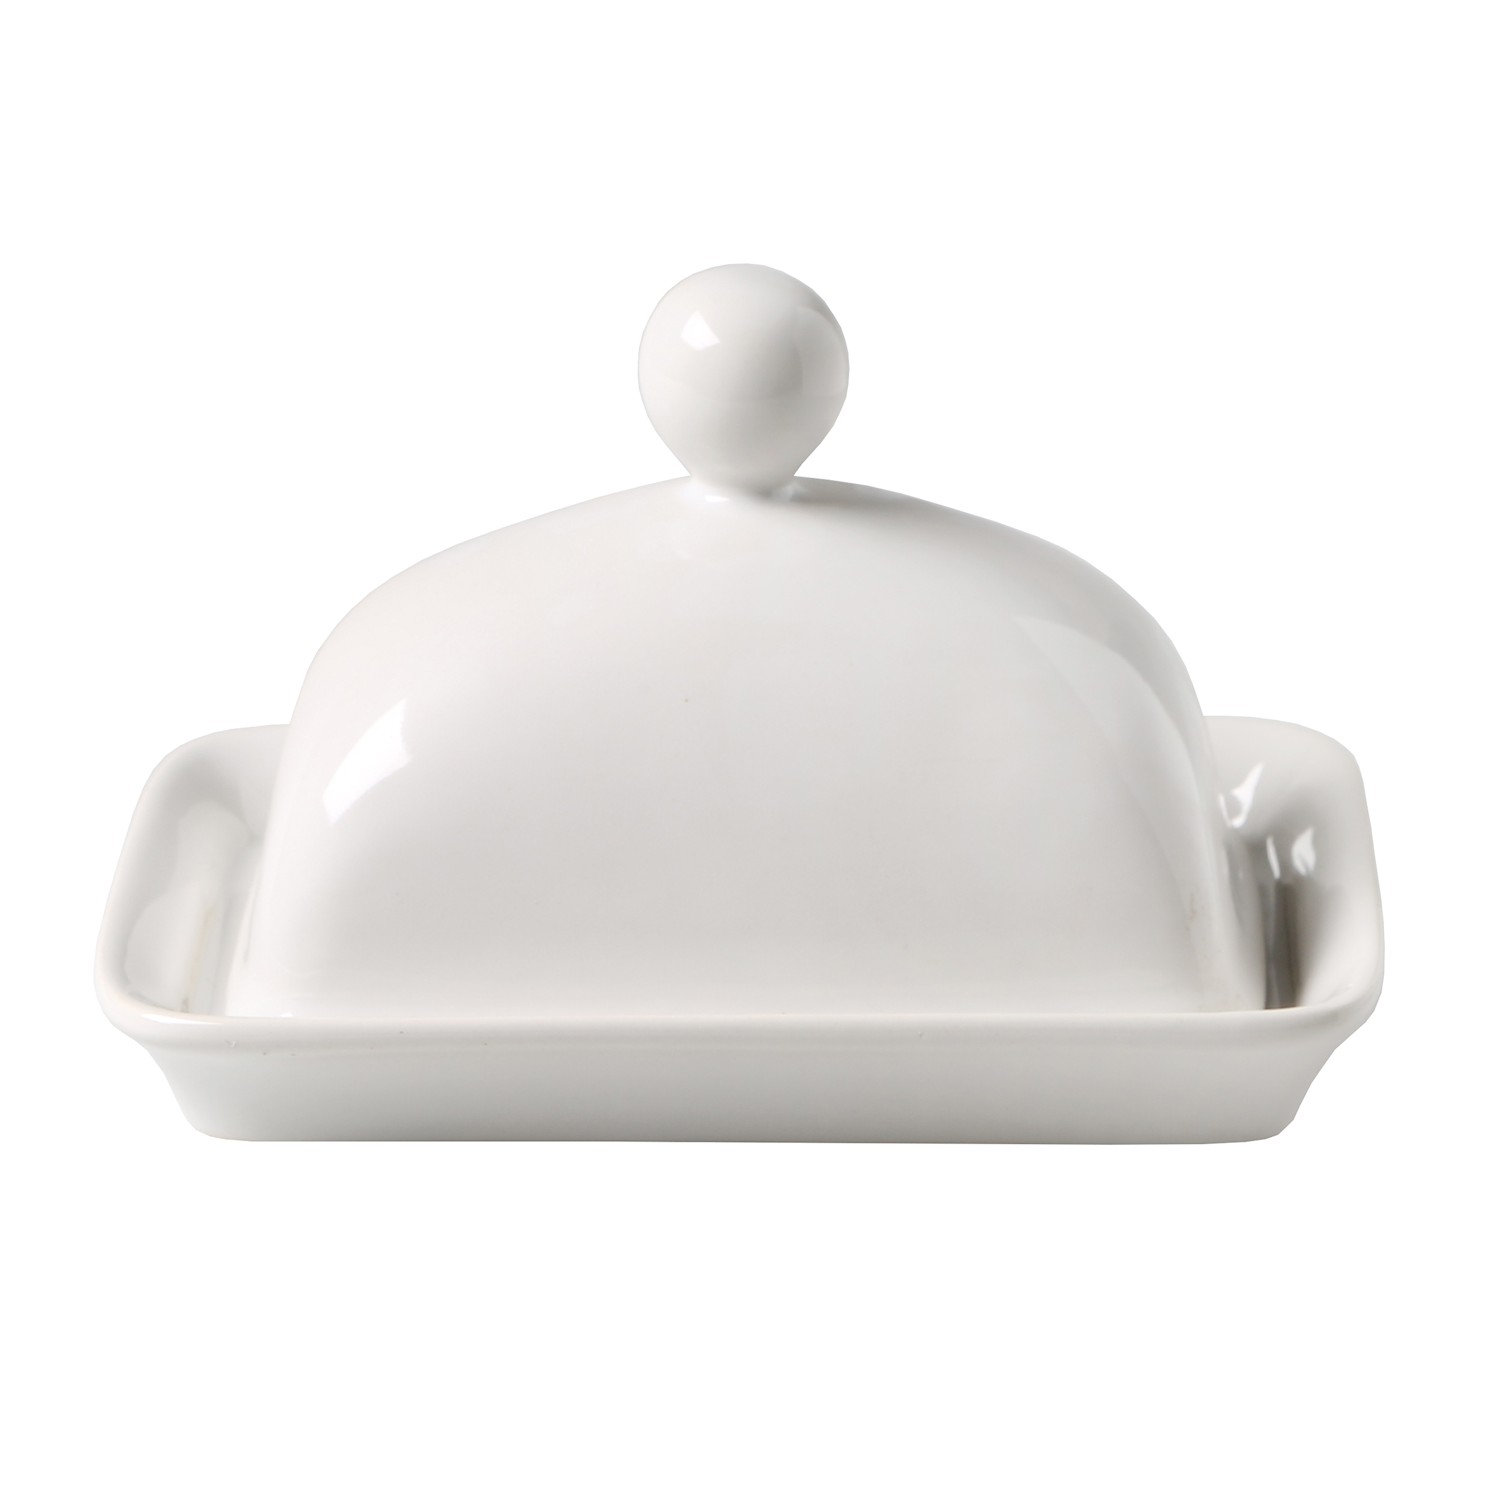 Home Essentials Covered Butter Dish - White Porcelain Butter Server